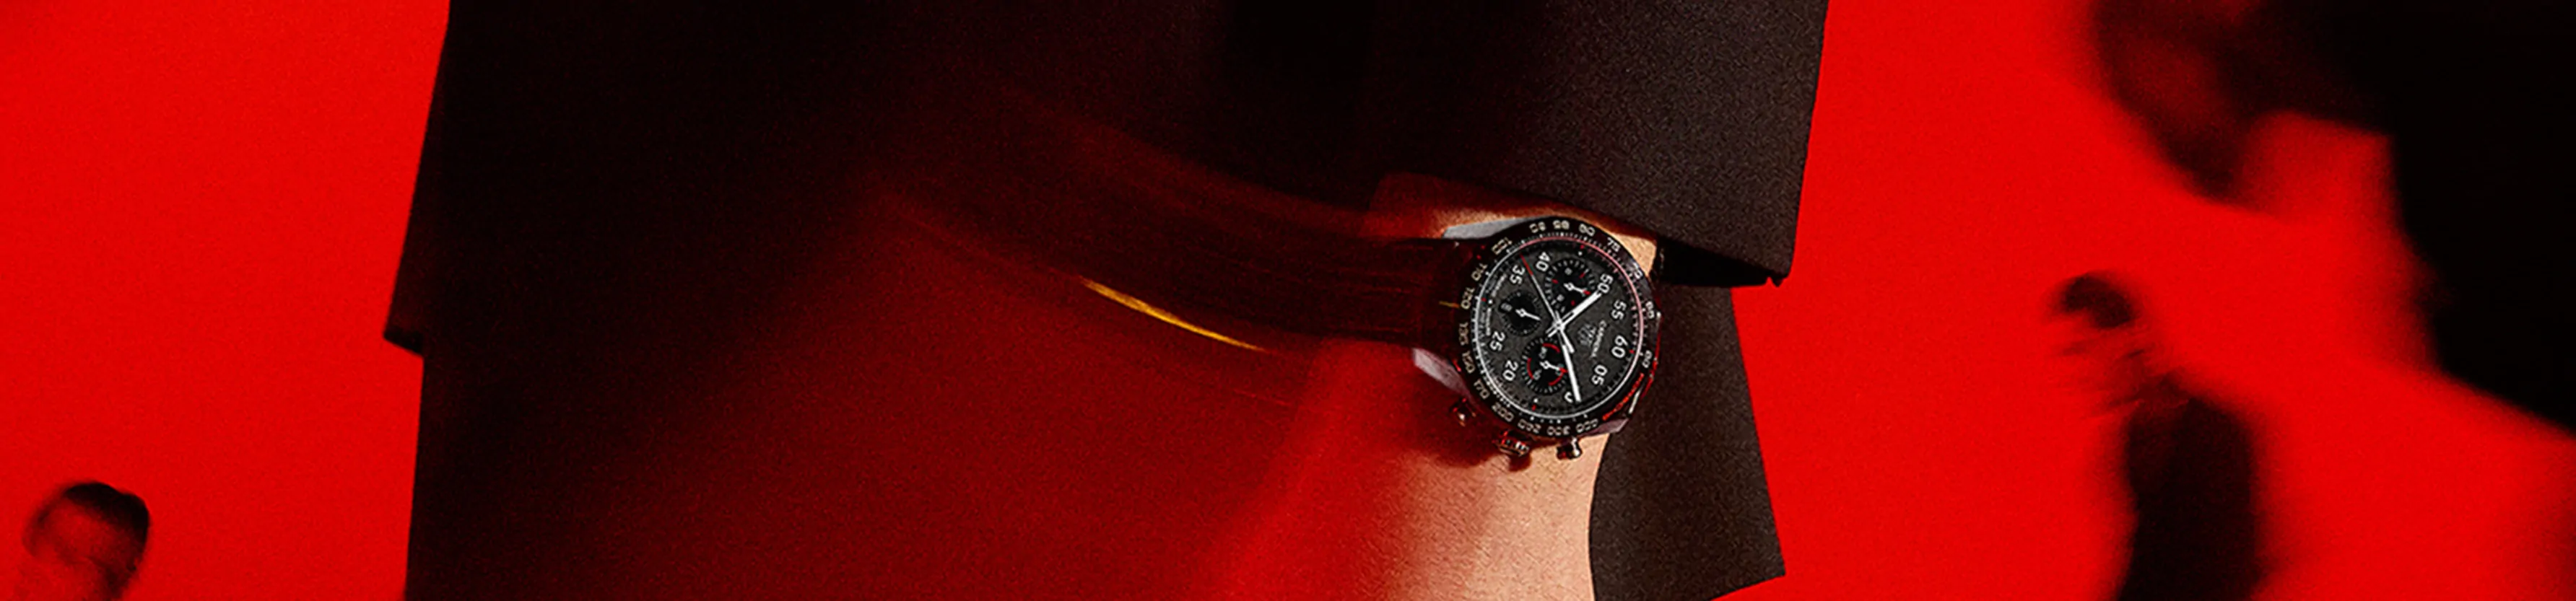 TAG Heuer and Porsche Join Forces